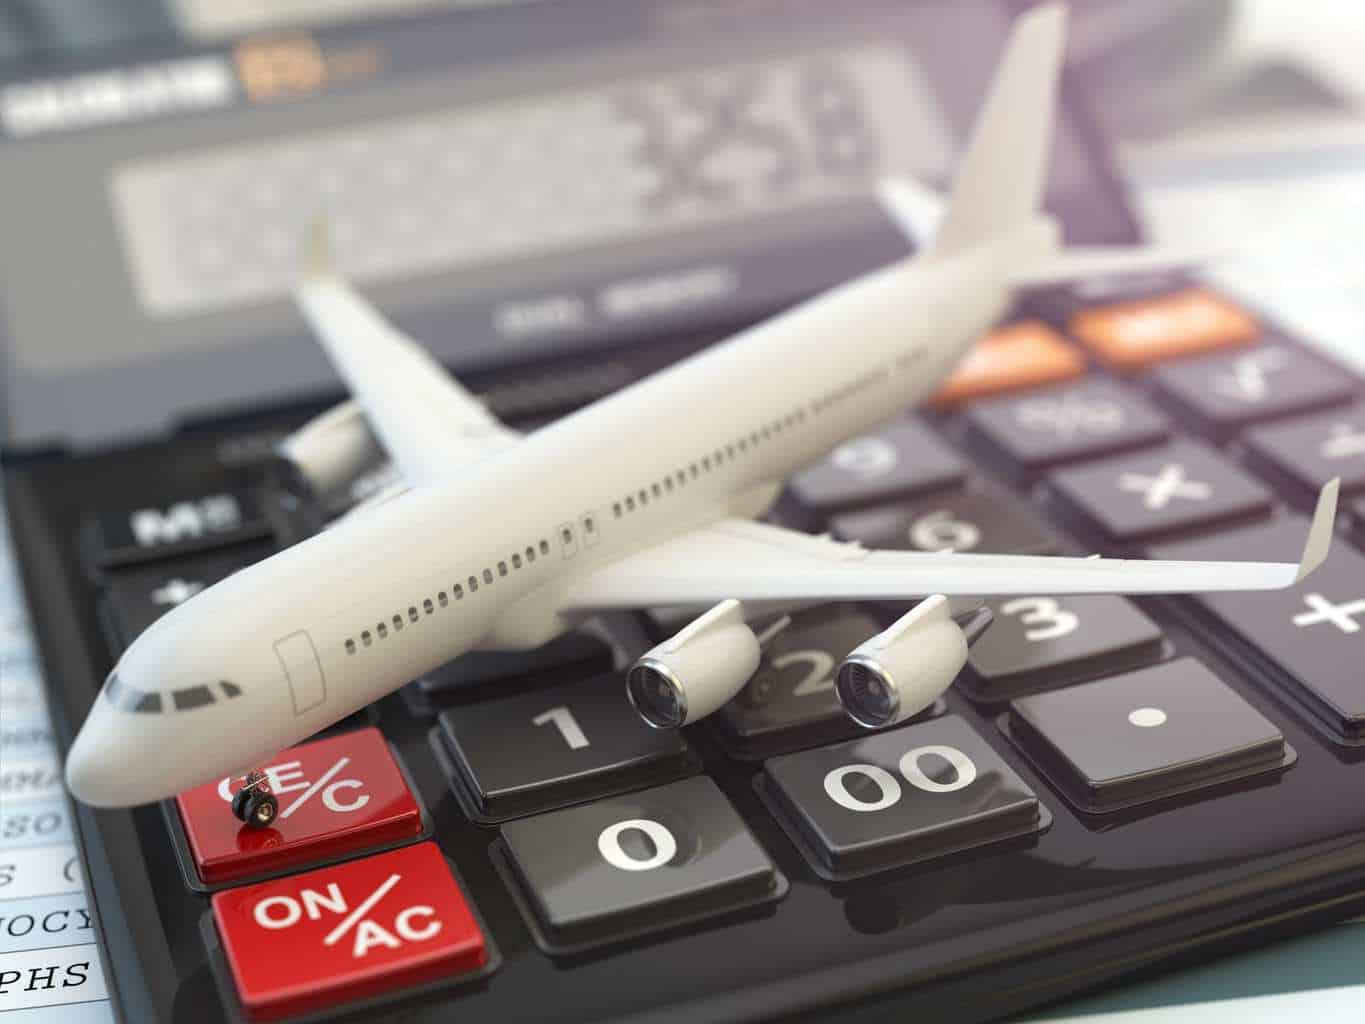 Flight booking tips: How to find cheap flights to practically anywhere in 2021?